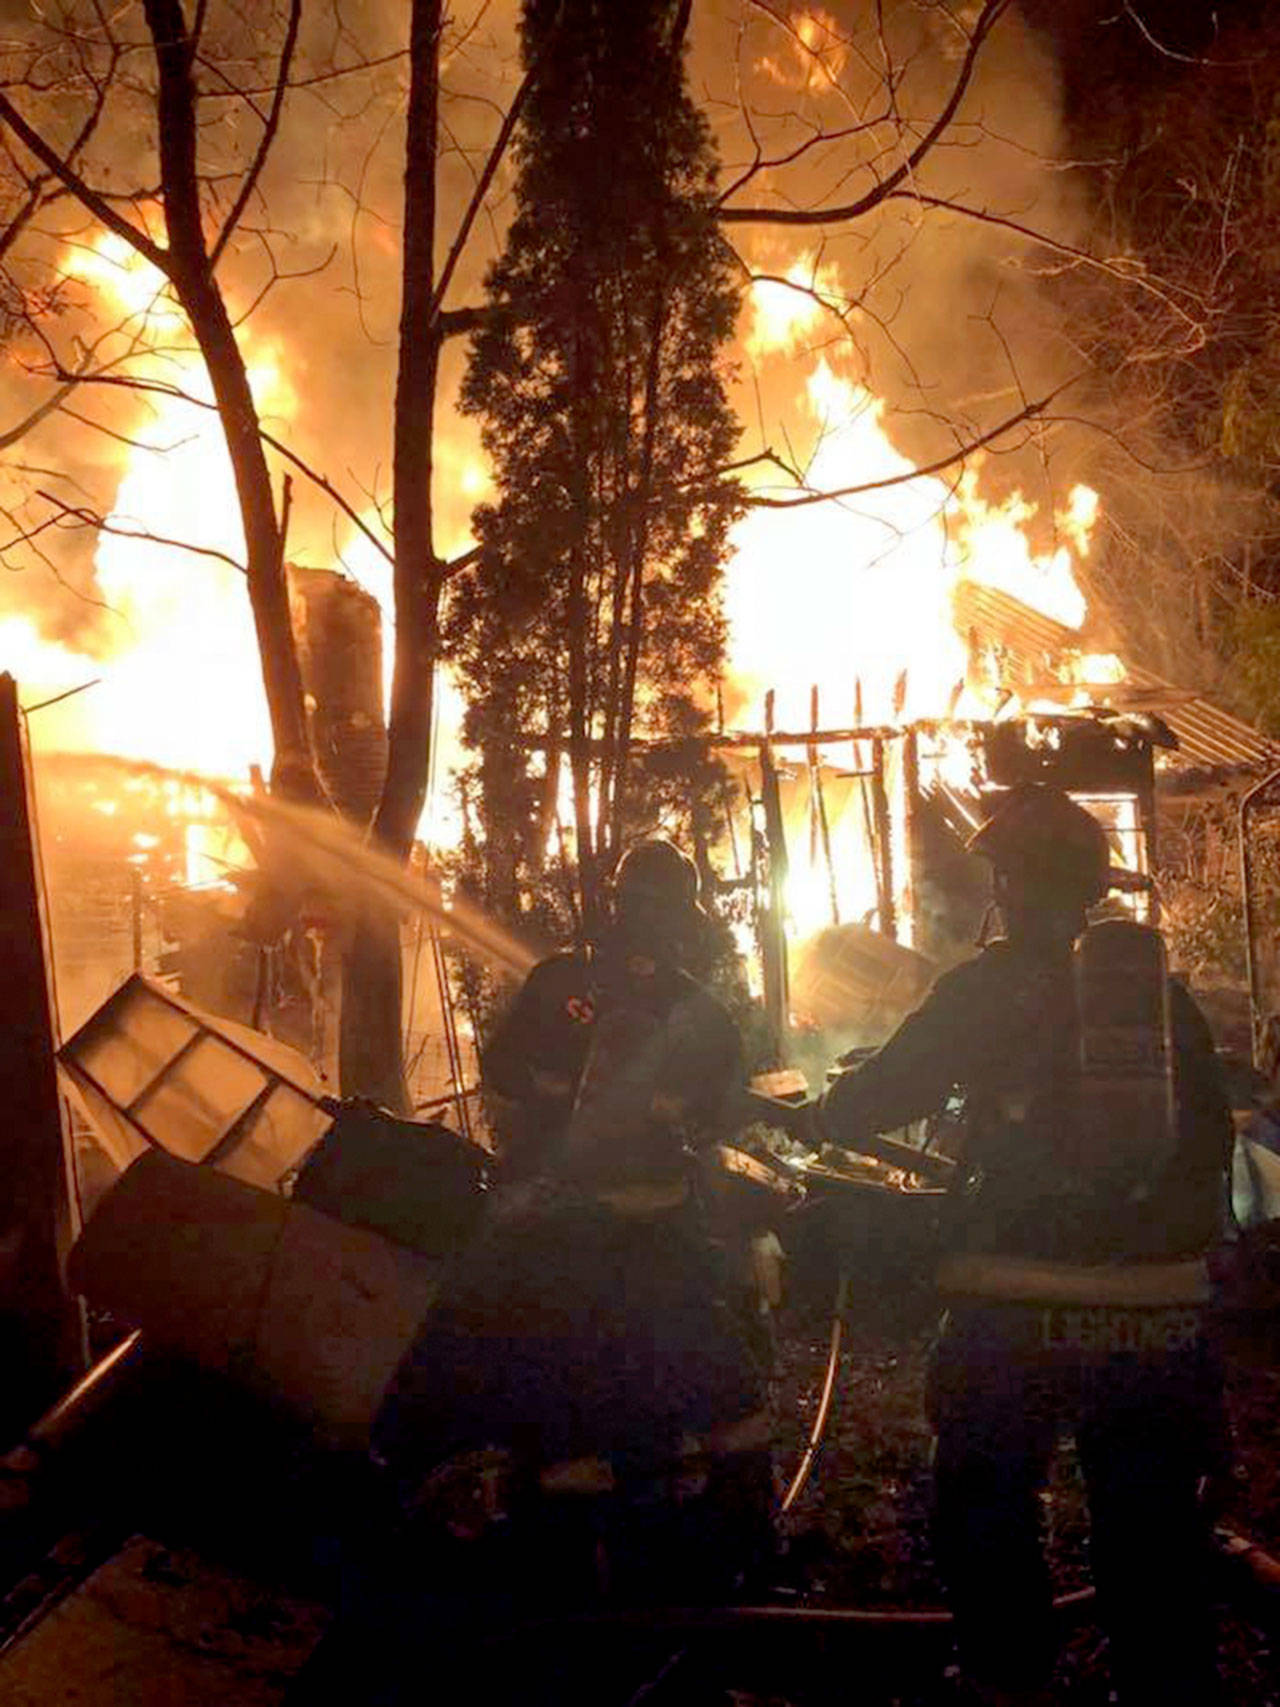 Firefighters fight a house fire in Brinnon that left a man homeless Monday and shut down U.S. Highway 101 for much of Monday night. (Denise Karp)